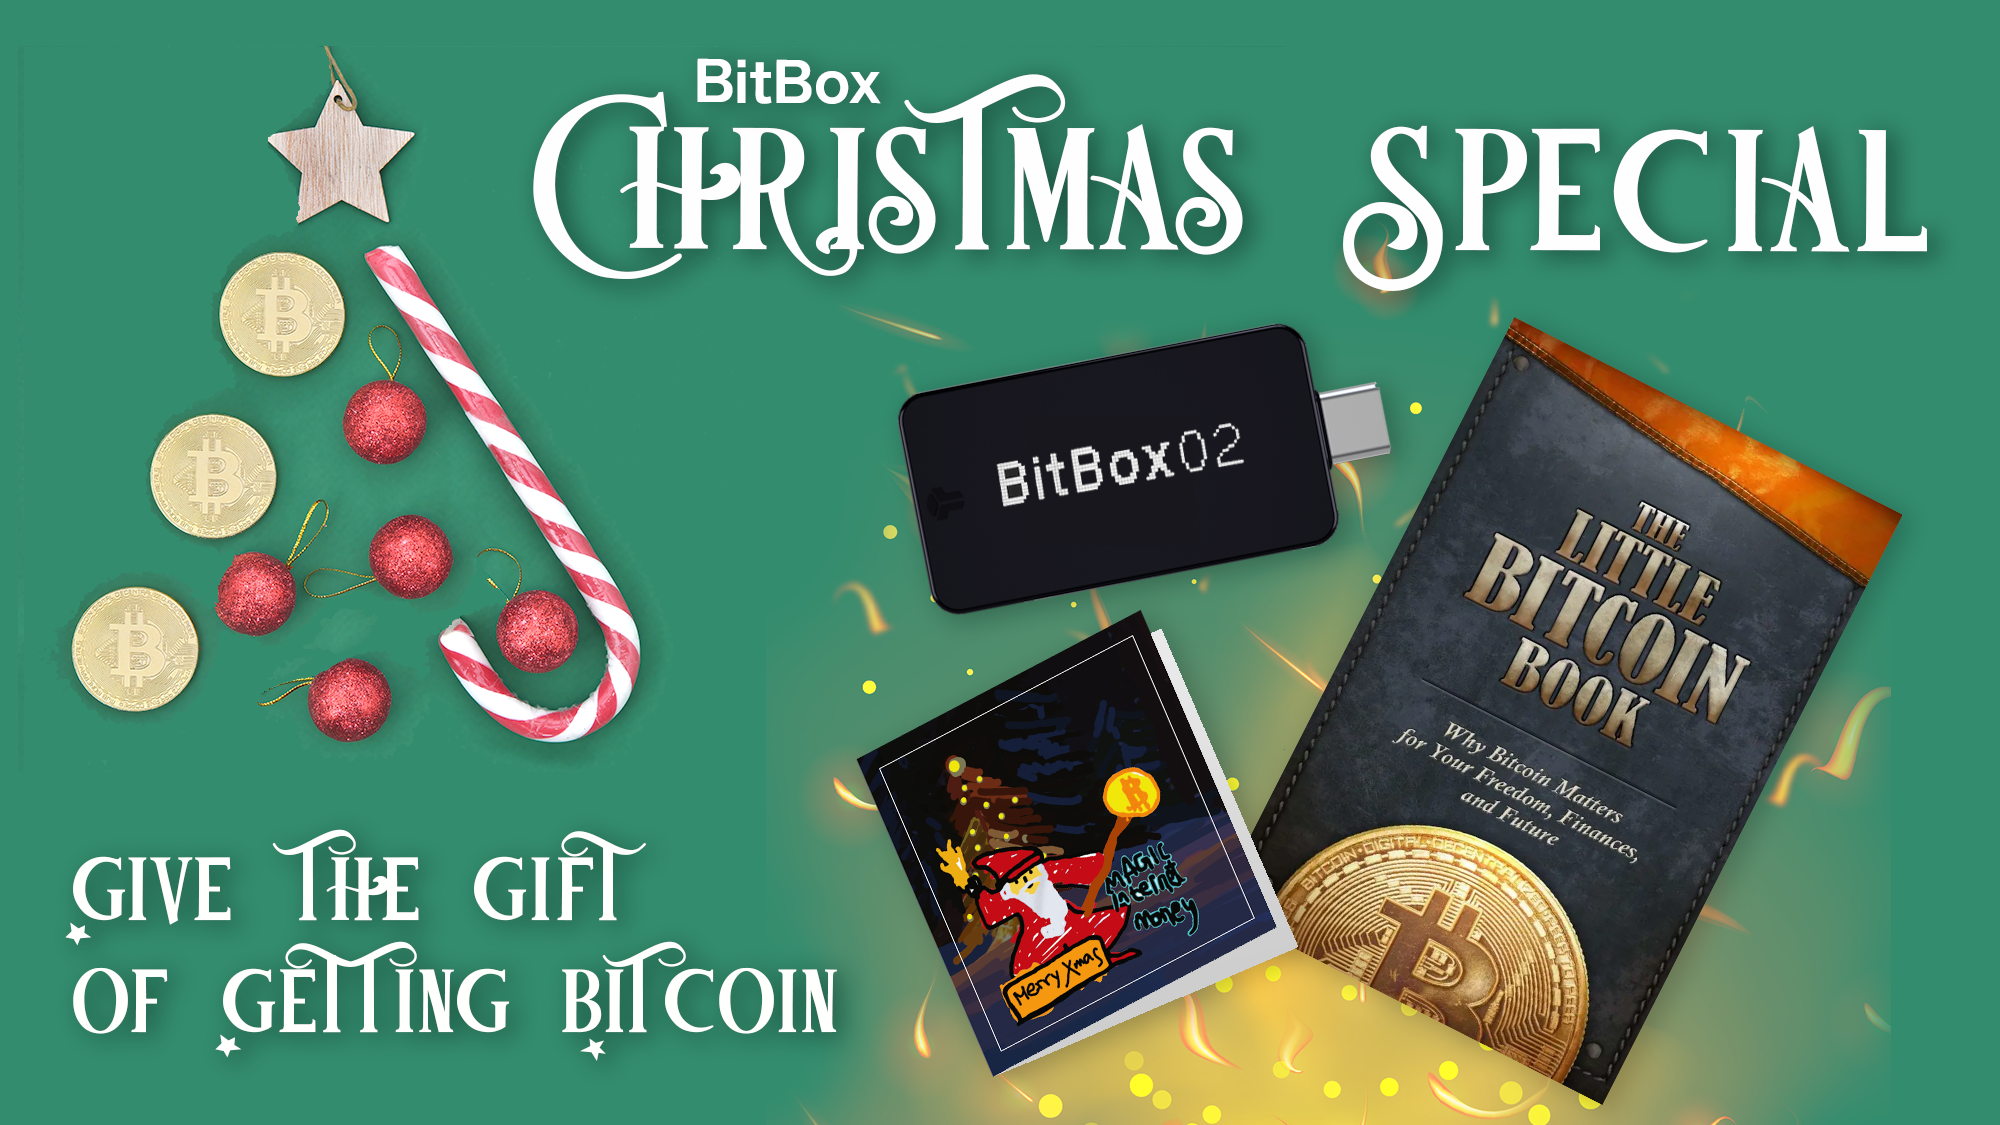 The perfect Bitcoin gift for Christmas? A BitBox02 hardware wallet